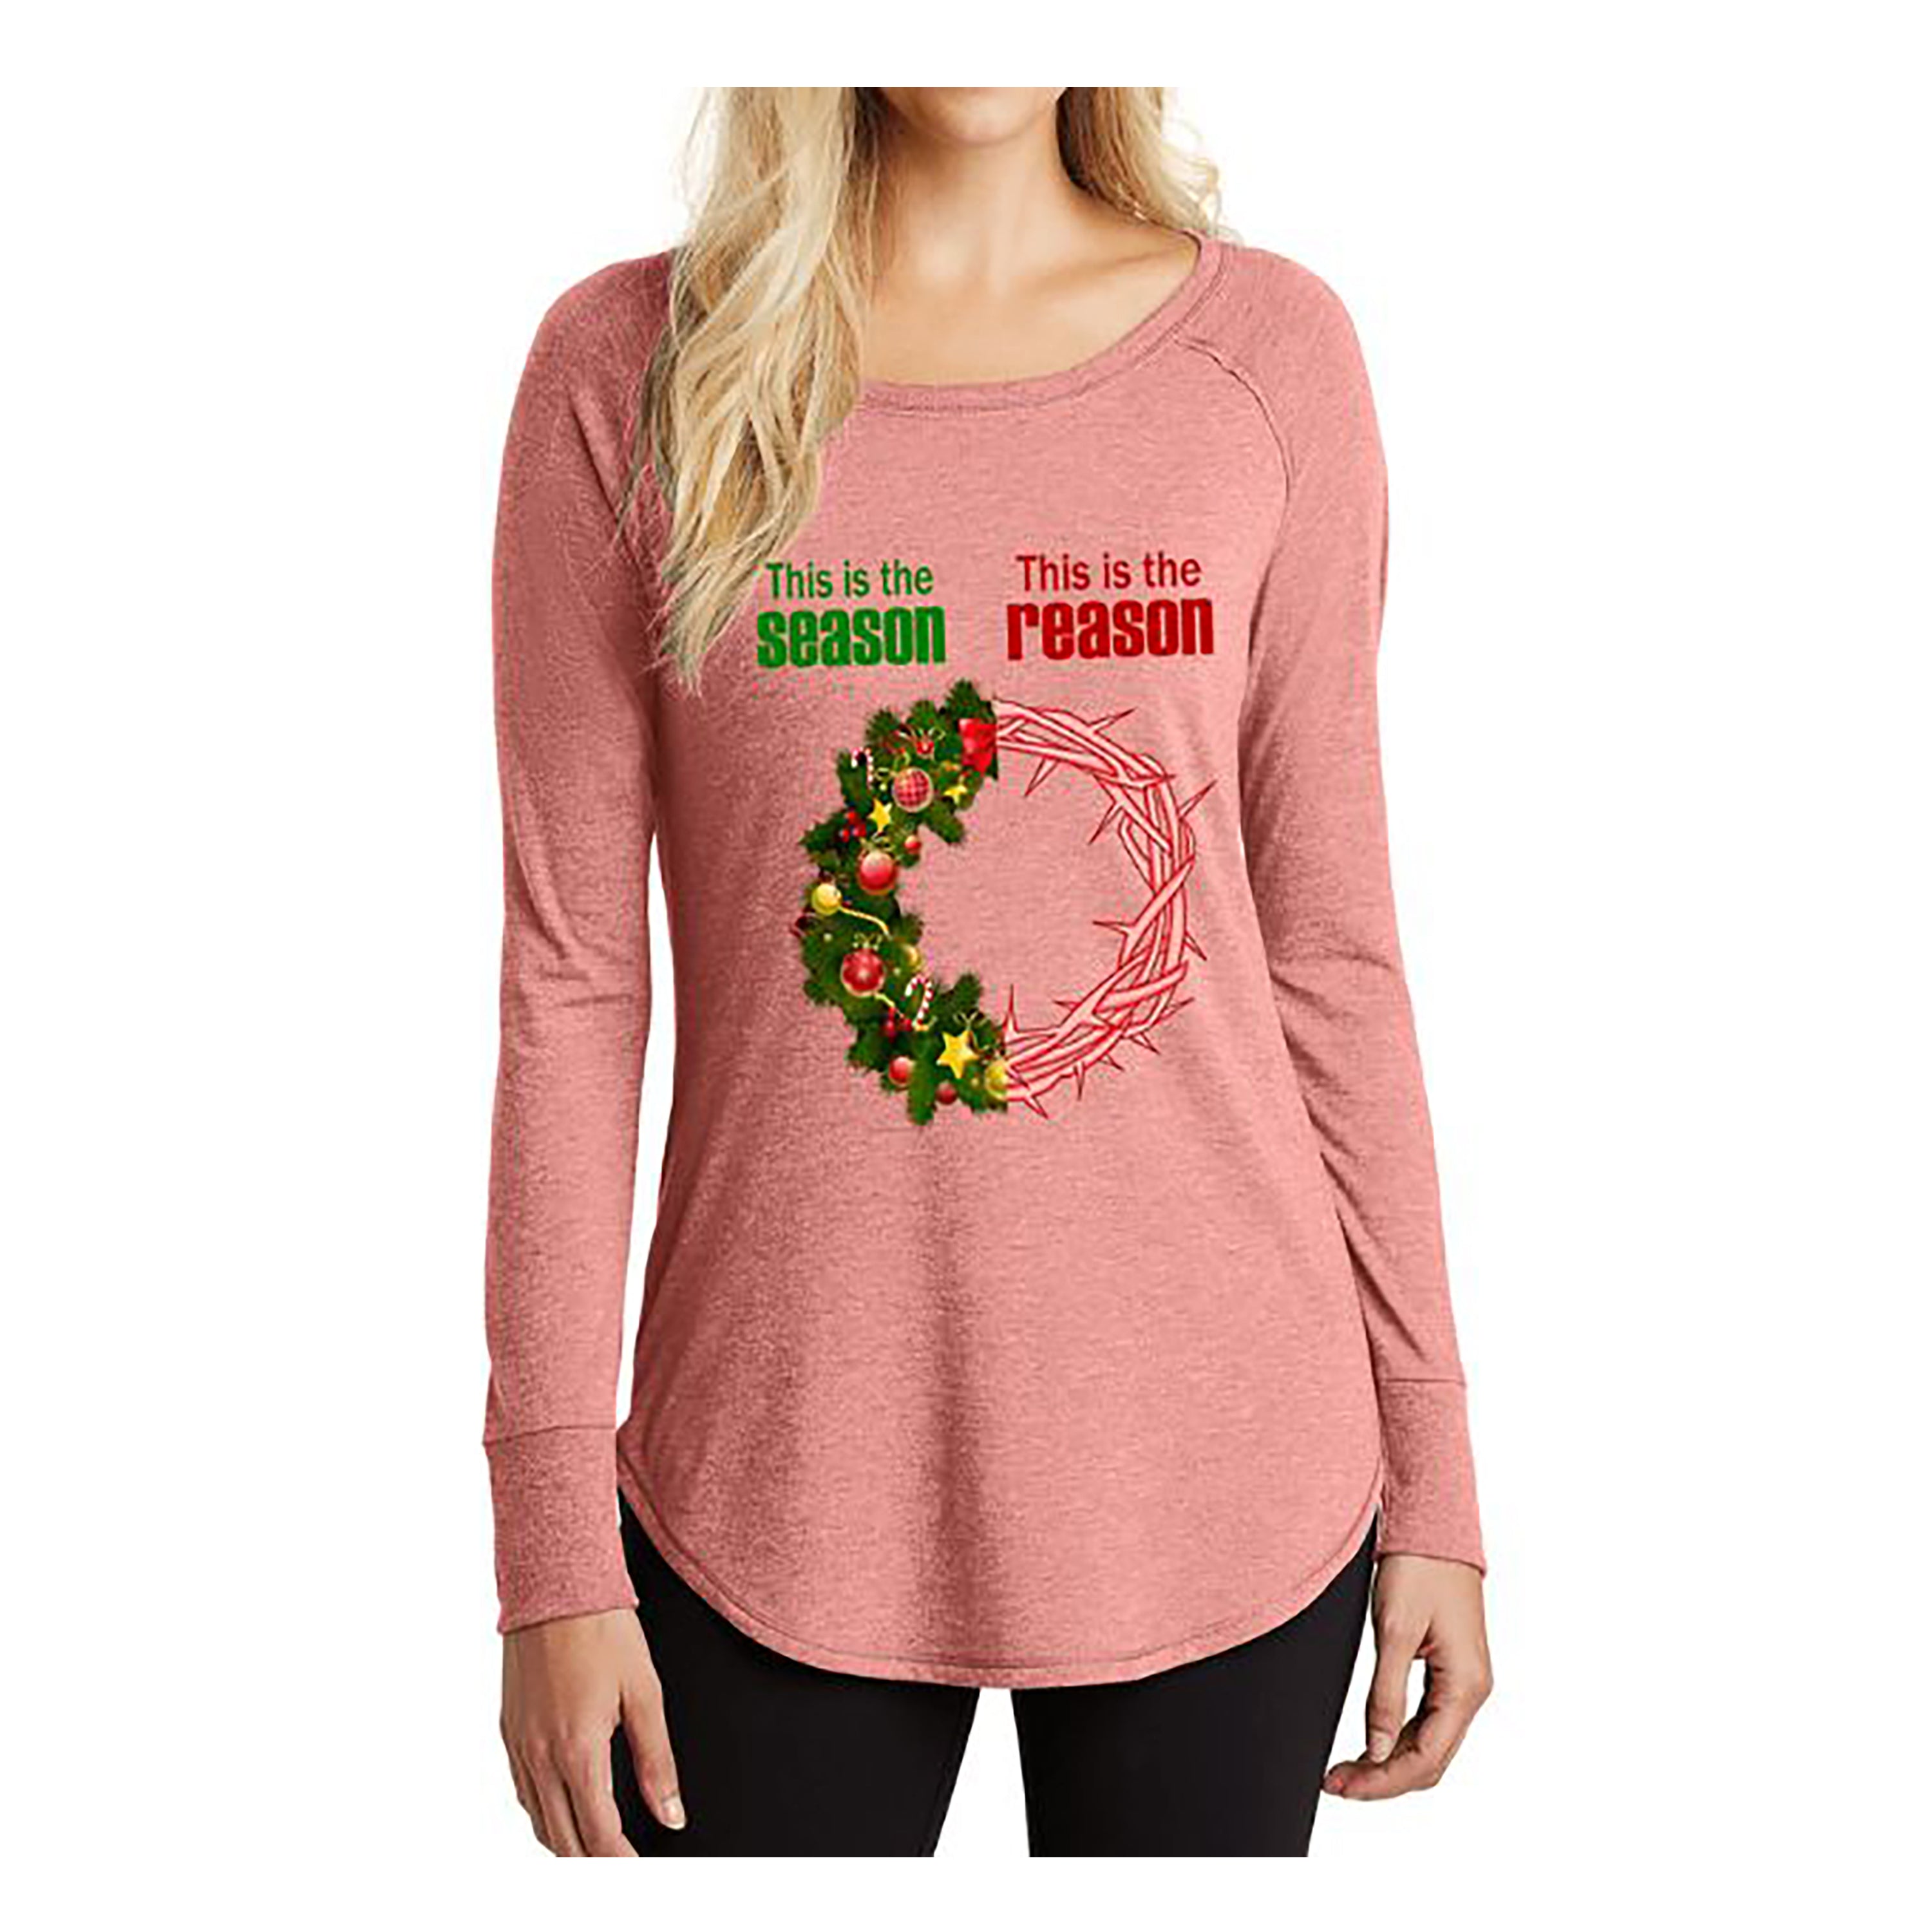 "THIS IS THE REASON THIS IS THE SEASON"- Stylish Long-Sleeve Tee